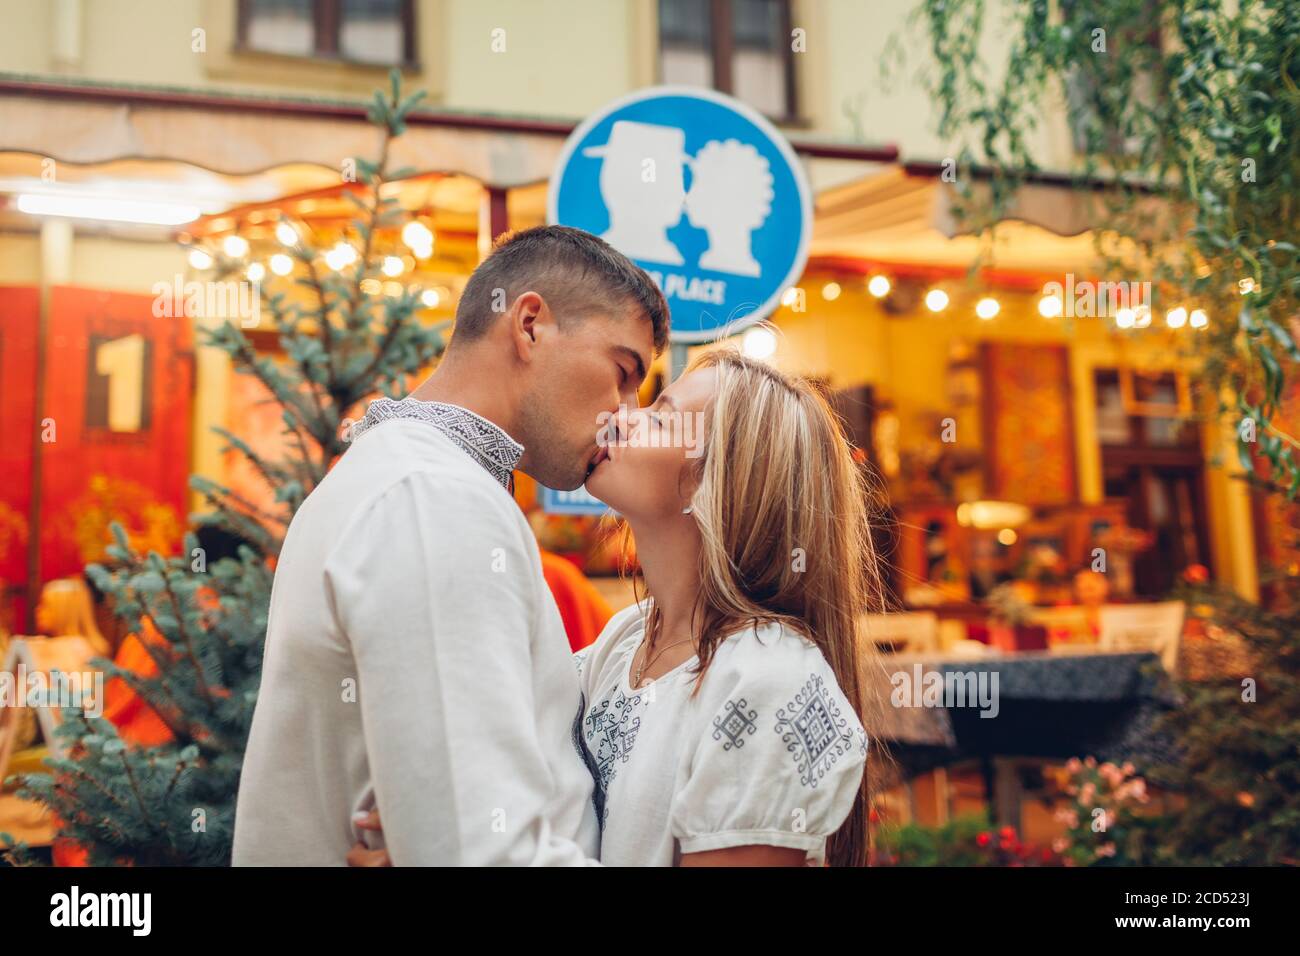 Sign Kiss Place High Resolution Stock Photography and Images - Alamy